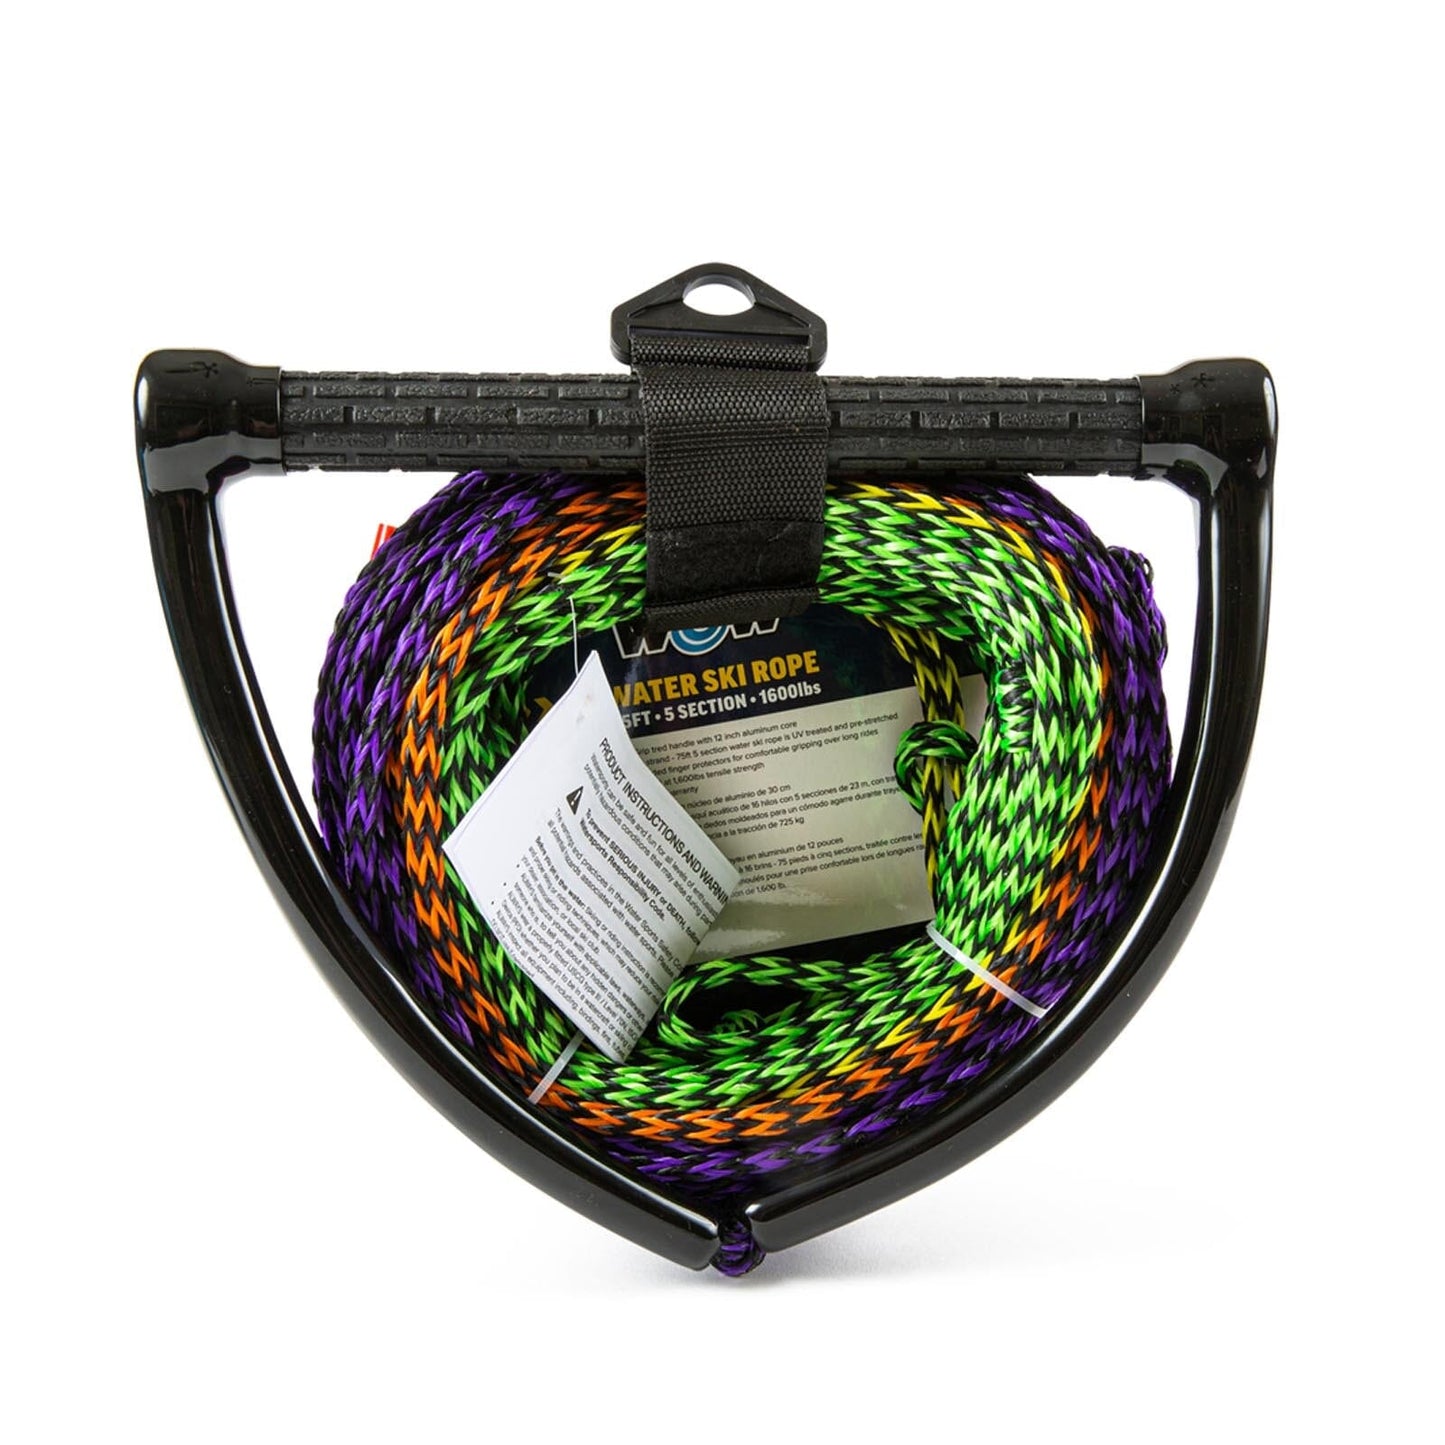 75' 5-section Water Ski Rope